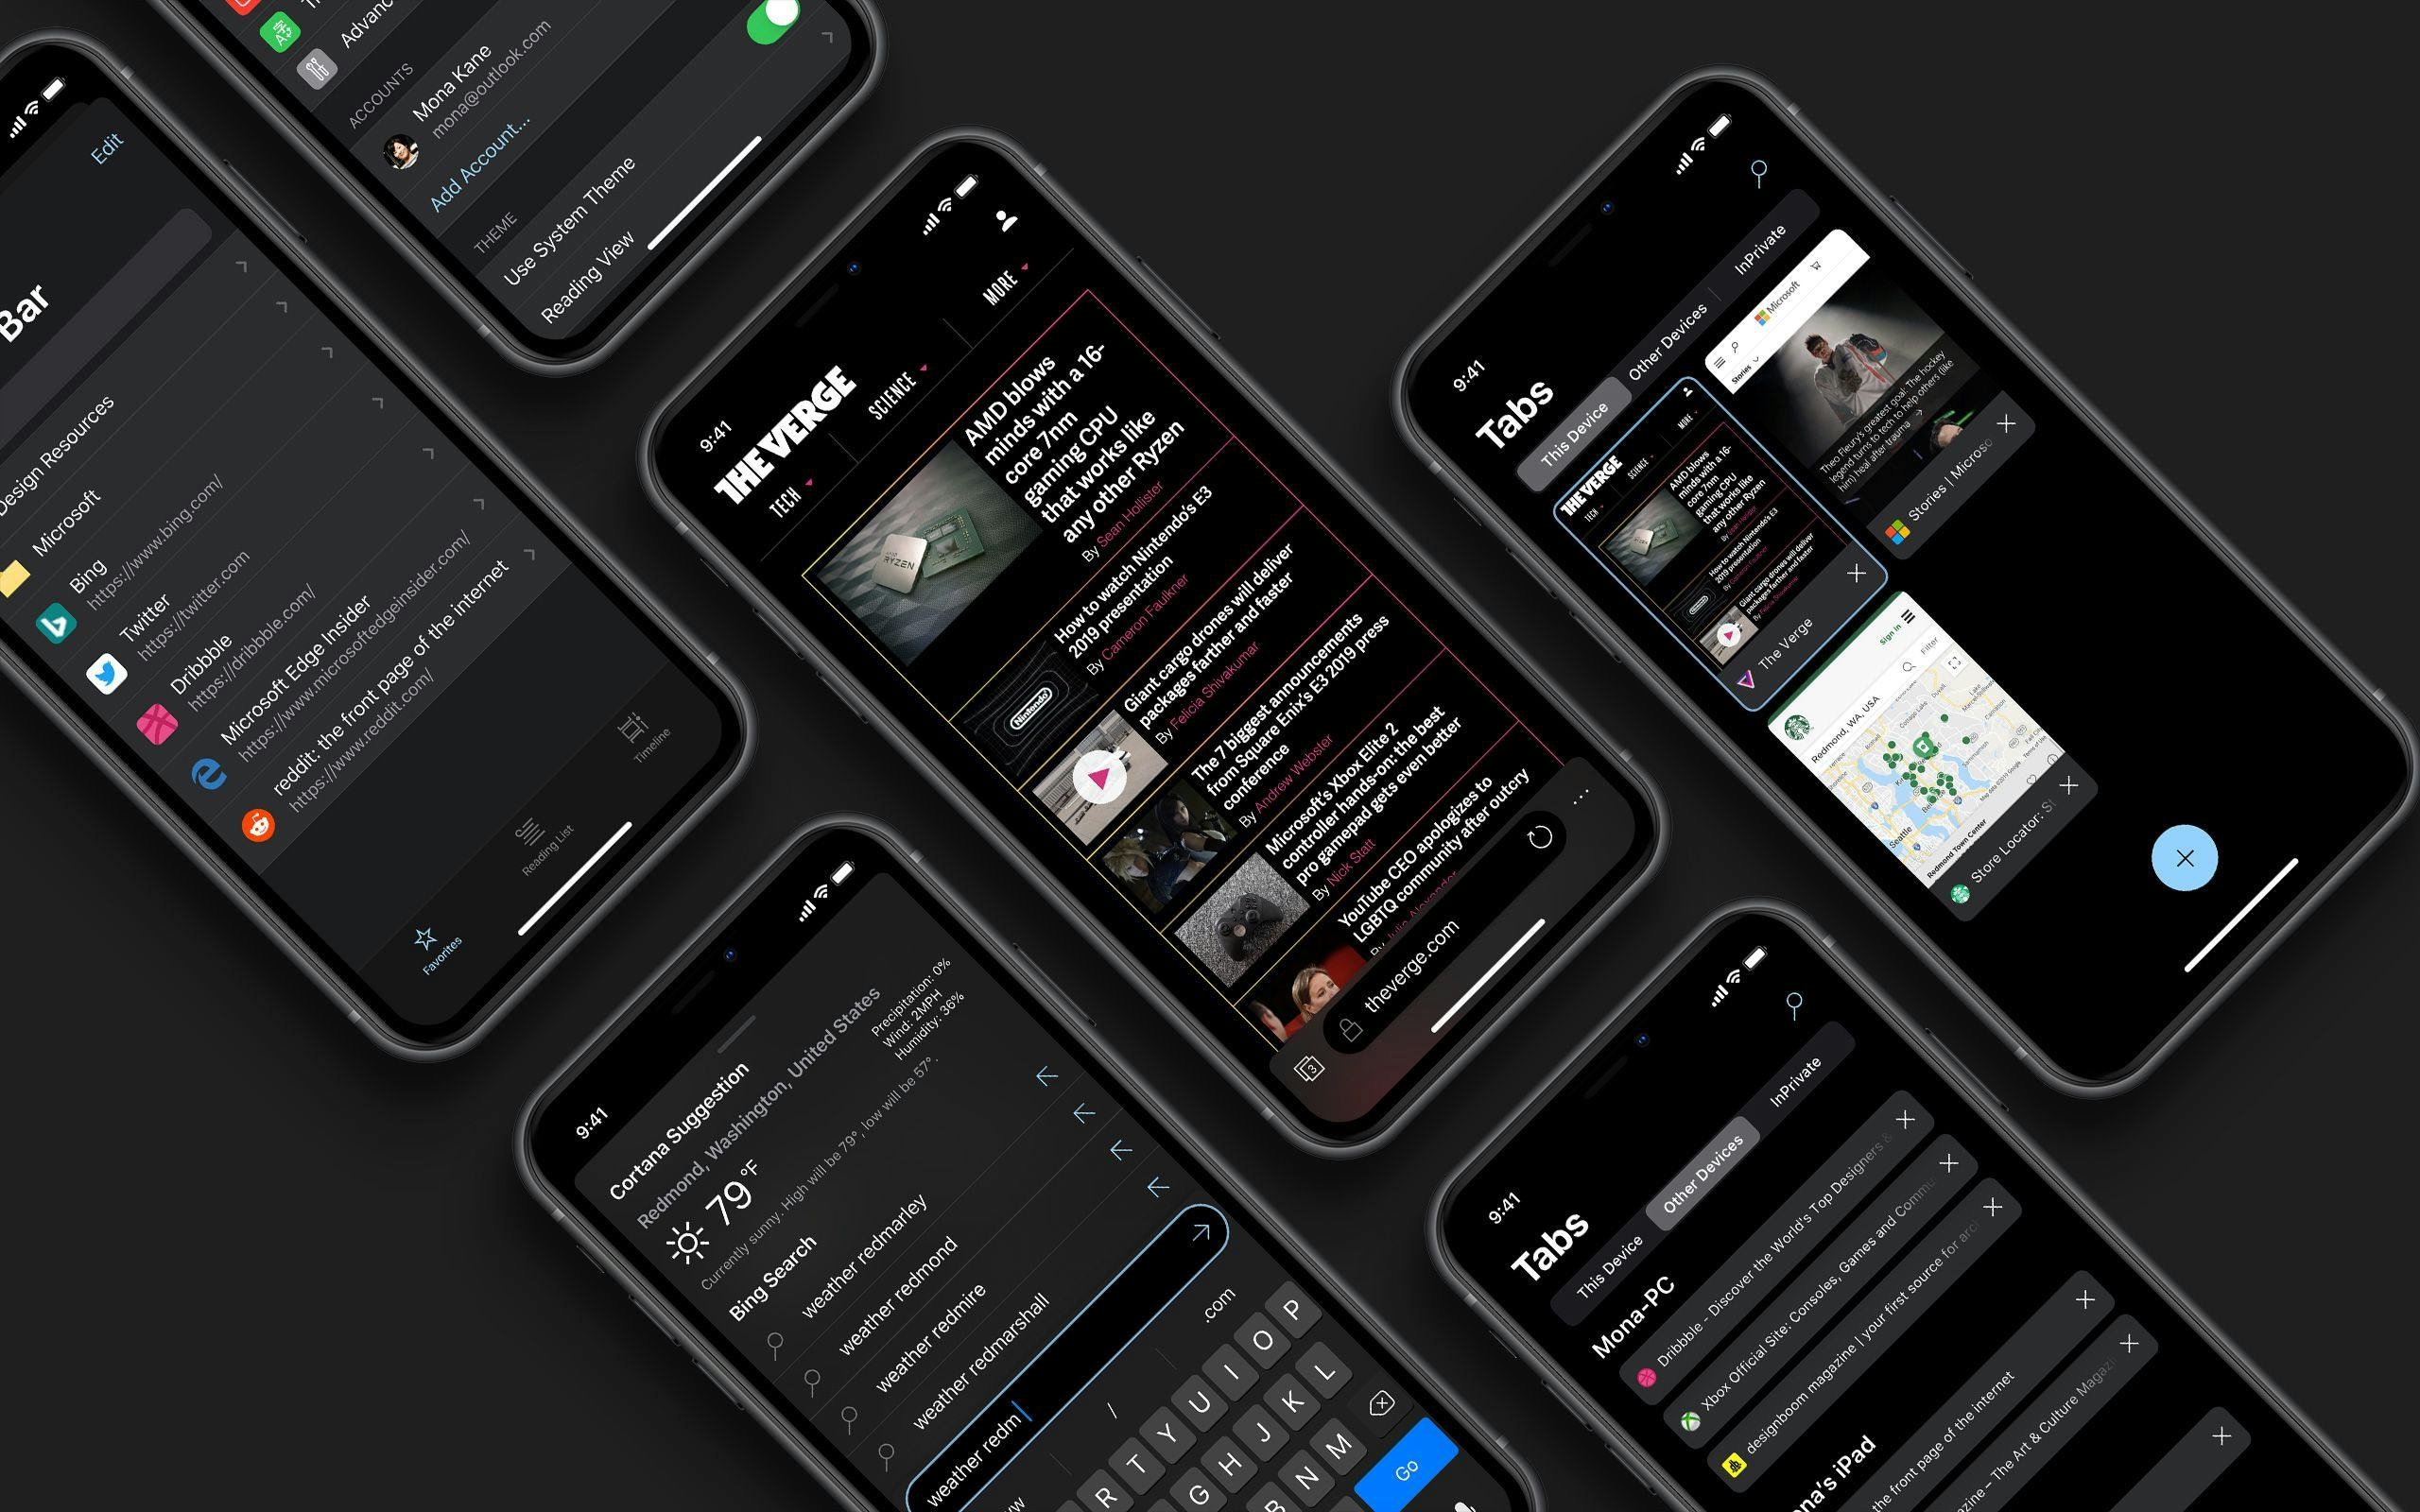 The refreshed Dark Mode gives the app a whole new look and feel.